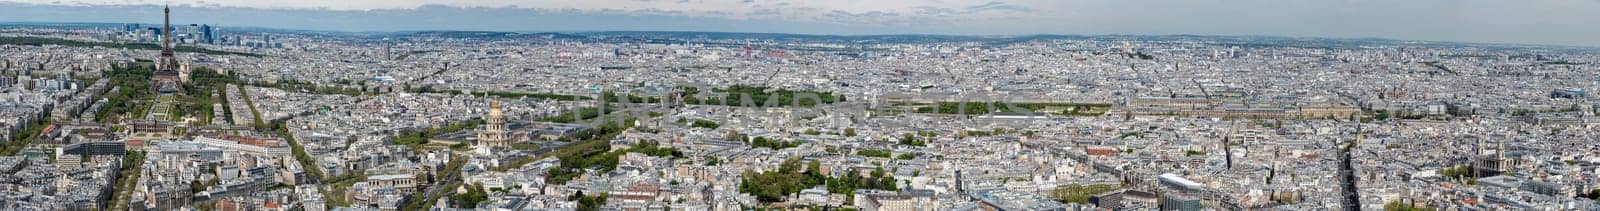 paris cityscape aerial view panorama by AndreaIzzotti